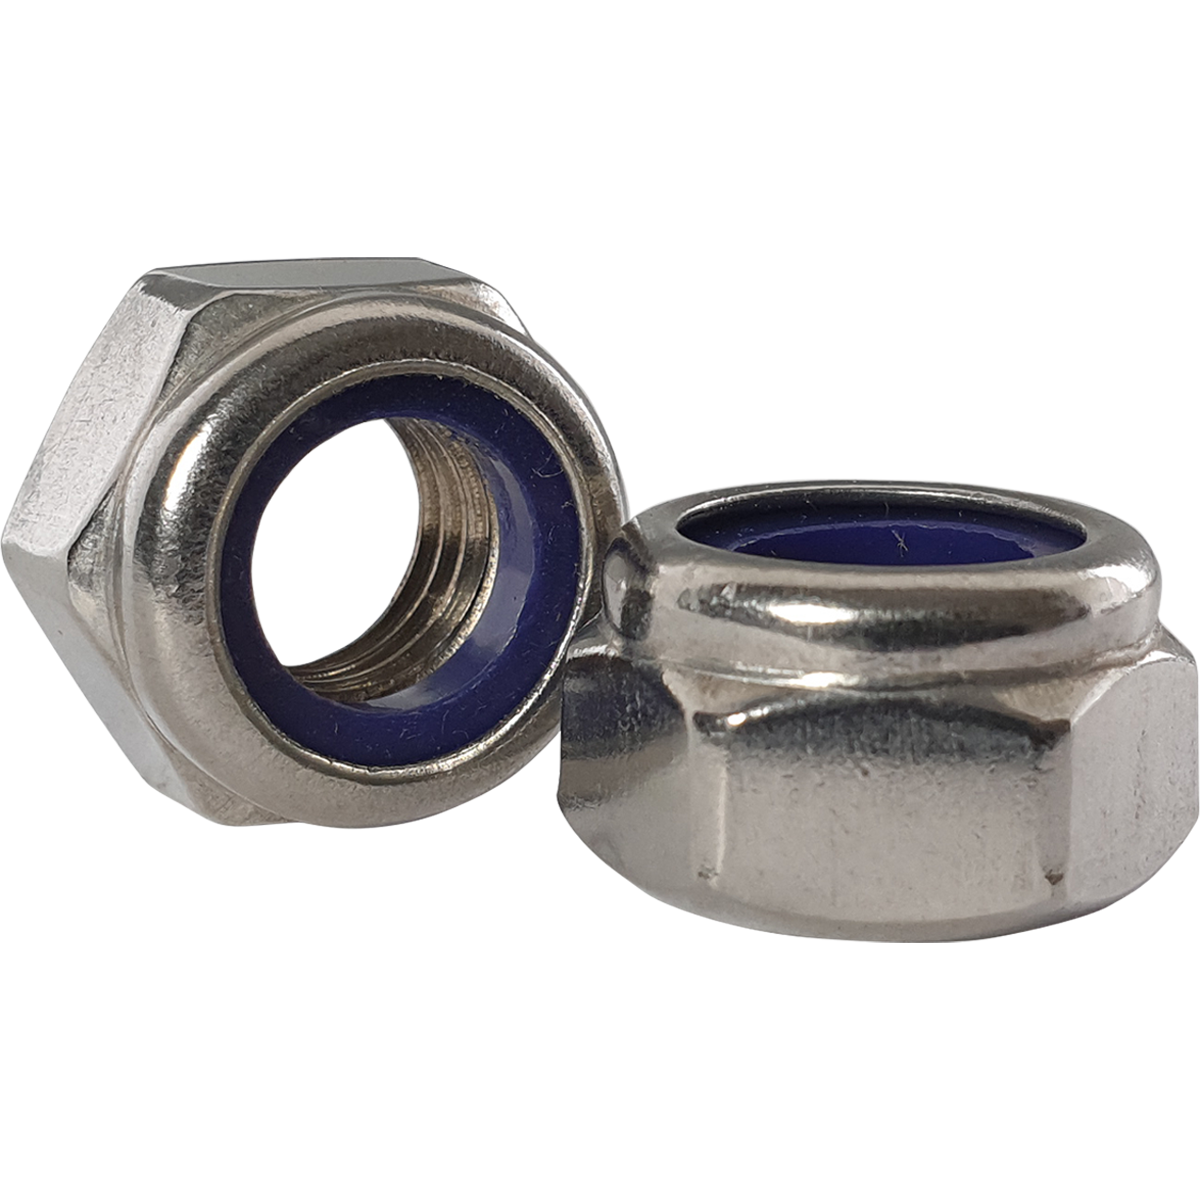 Nylon insert nuts, known as nyloc nuts. A hex nuts with nylon inserts for a firmer hold. Available at competitive prices with Fusion Fixings